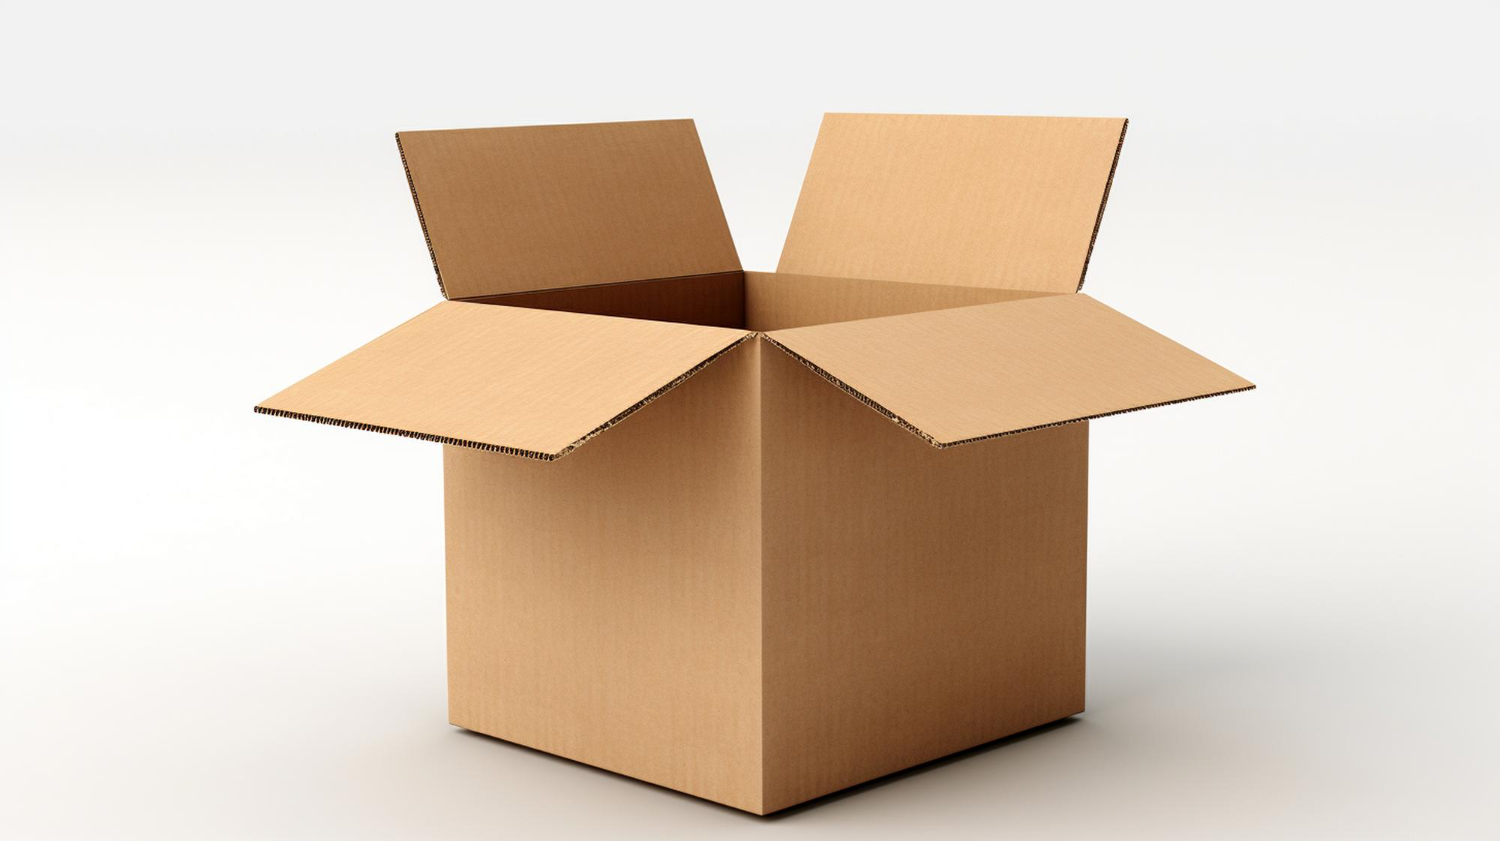 3 Common Types of Boxes